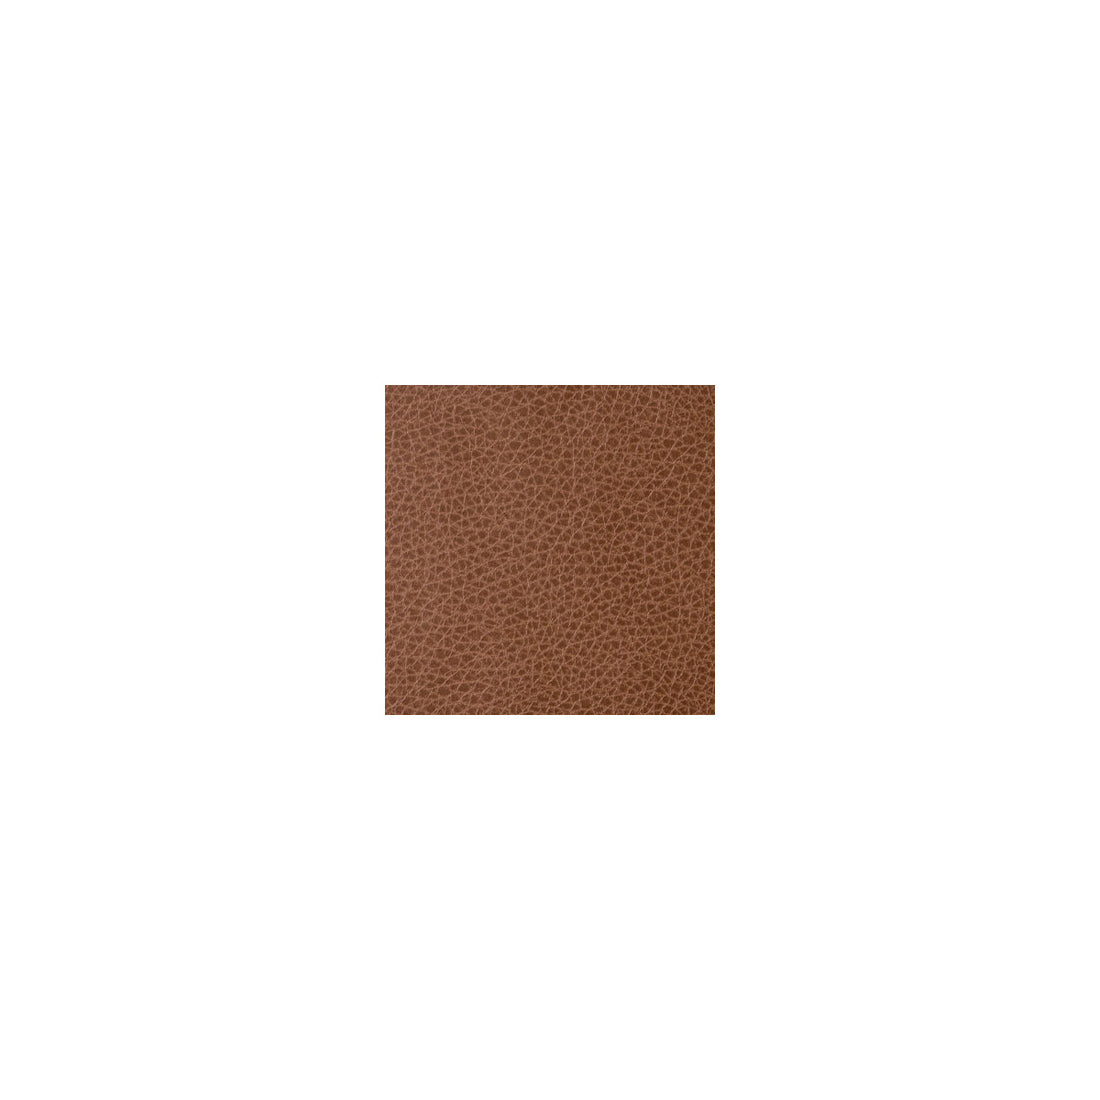 Foothill fabric in cacao color - pattern FOOTHILL.606.0 - by Kravet Contract in the Sta-Kleen collection